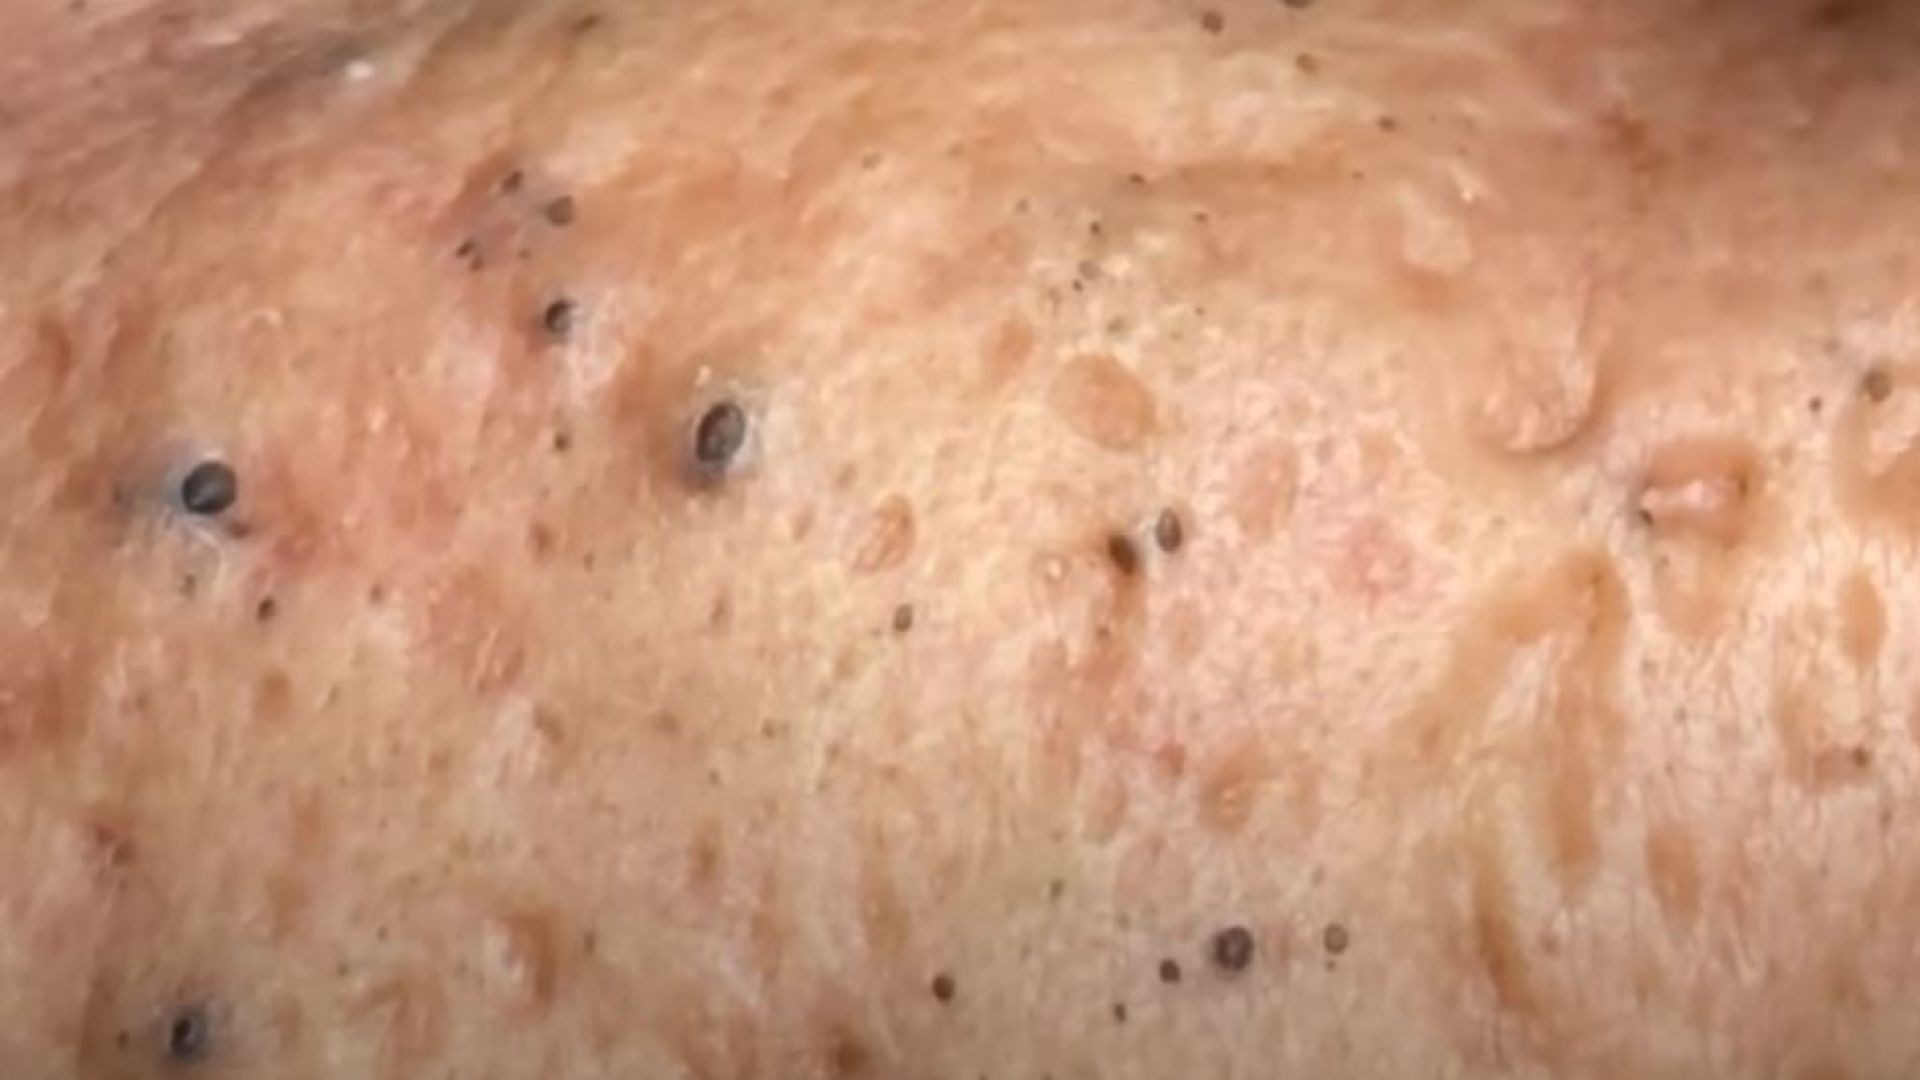 Squeeze blackheads (perennial) 50 years around the ear part 2 @Quyet Tran Official